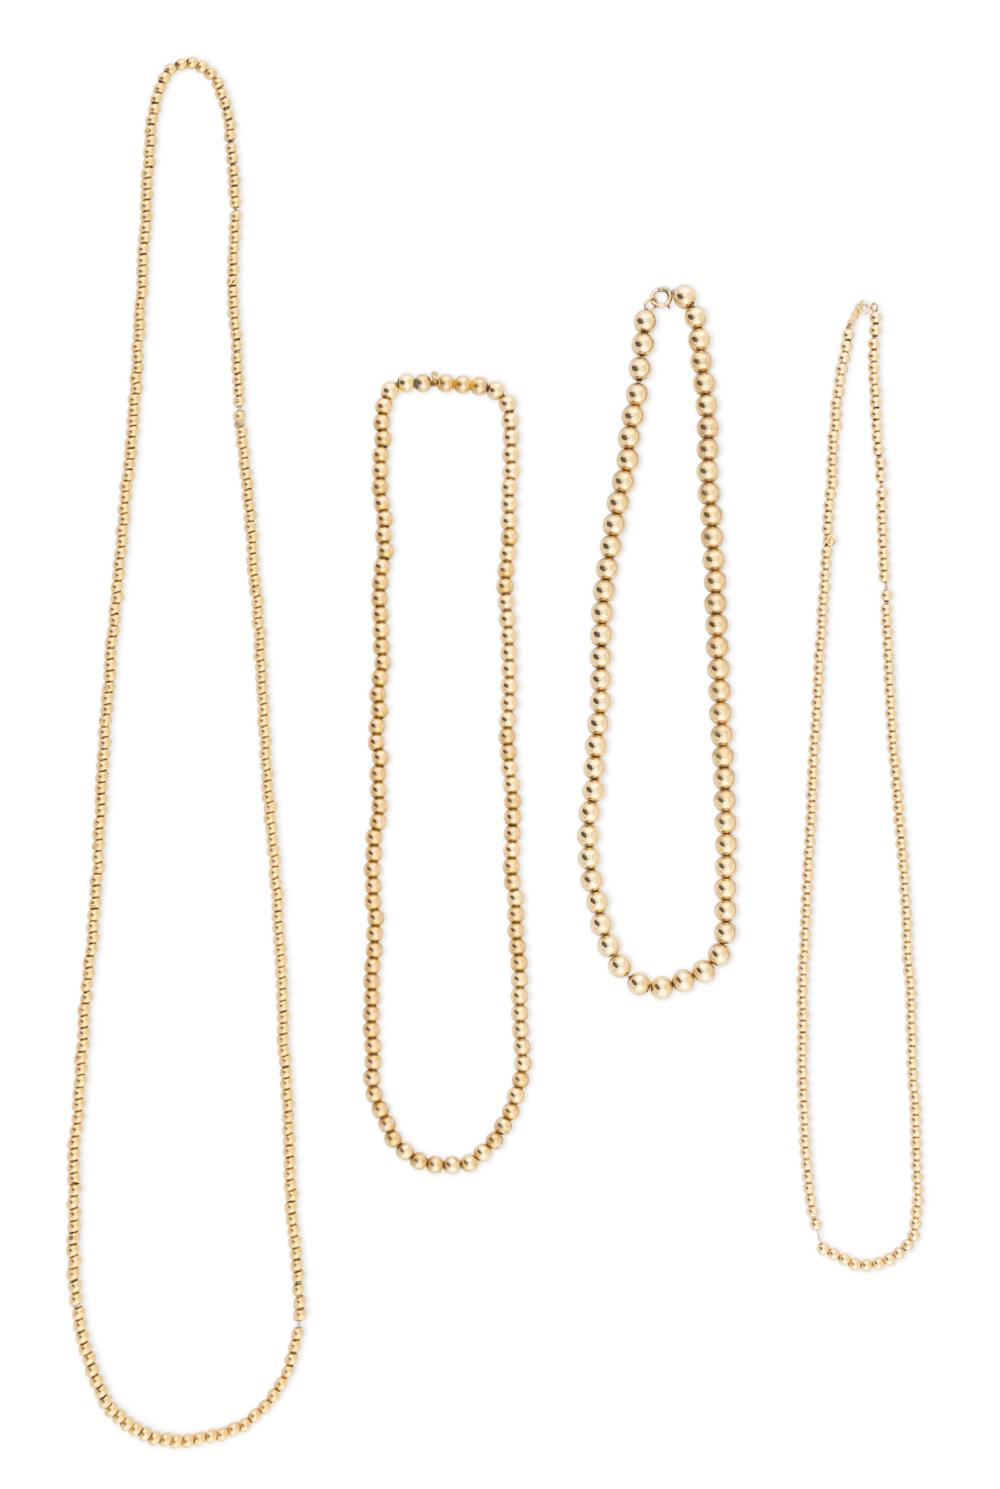 FOUR 14KT YELLOW GOLD BEAD NECKLACES 350bed